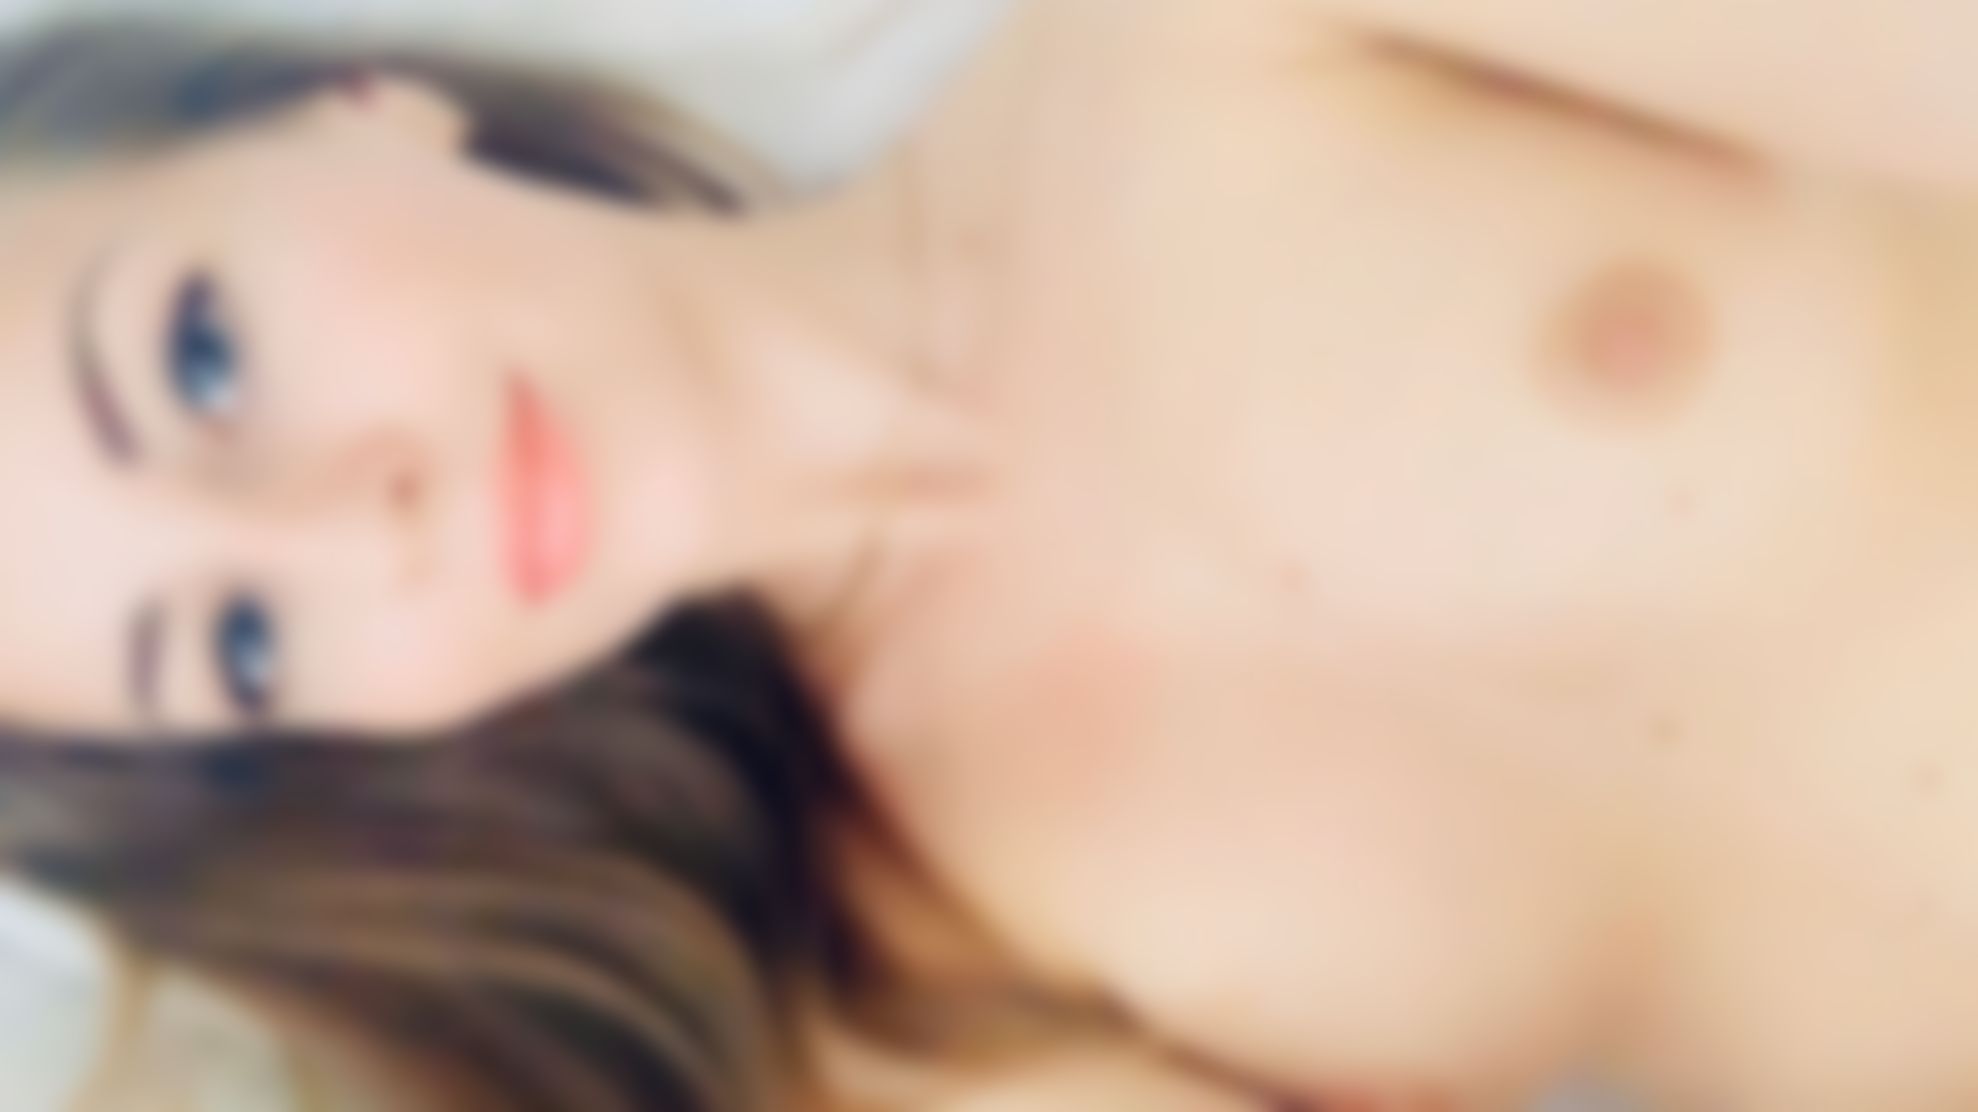 emilyloveu : touch my pussy gently and i will moan until you stop ❤️❤️❤️